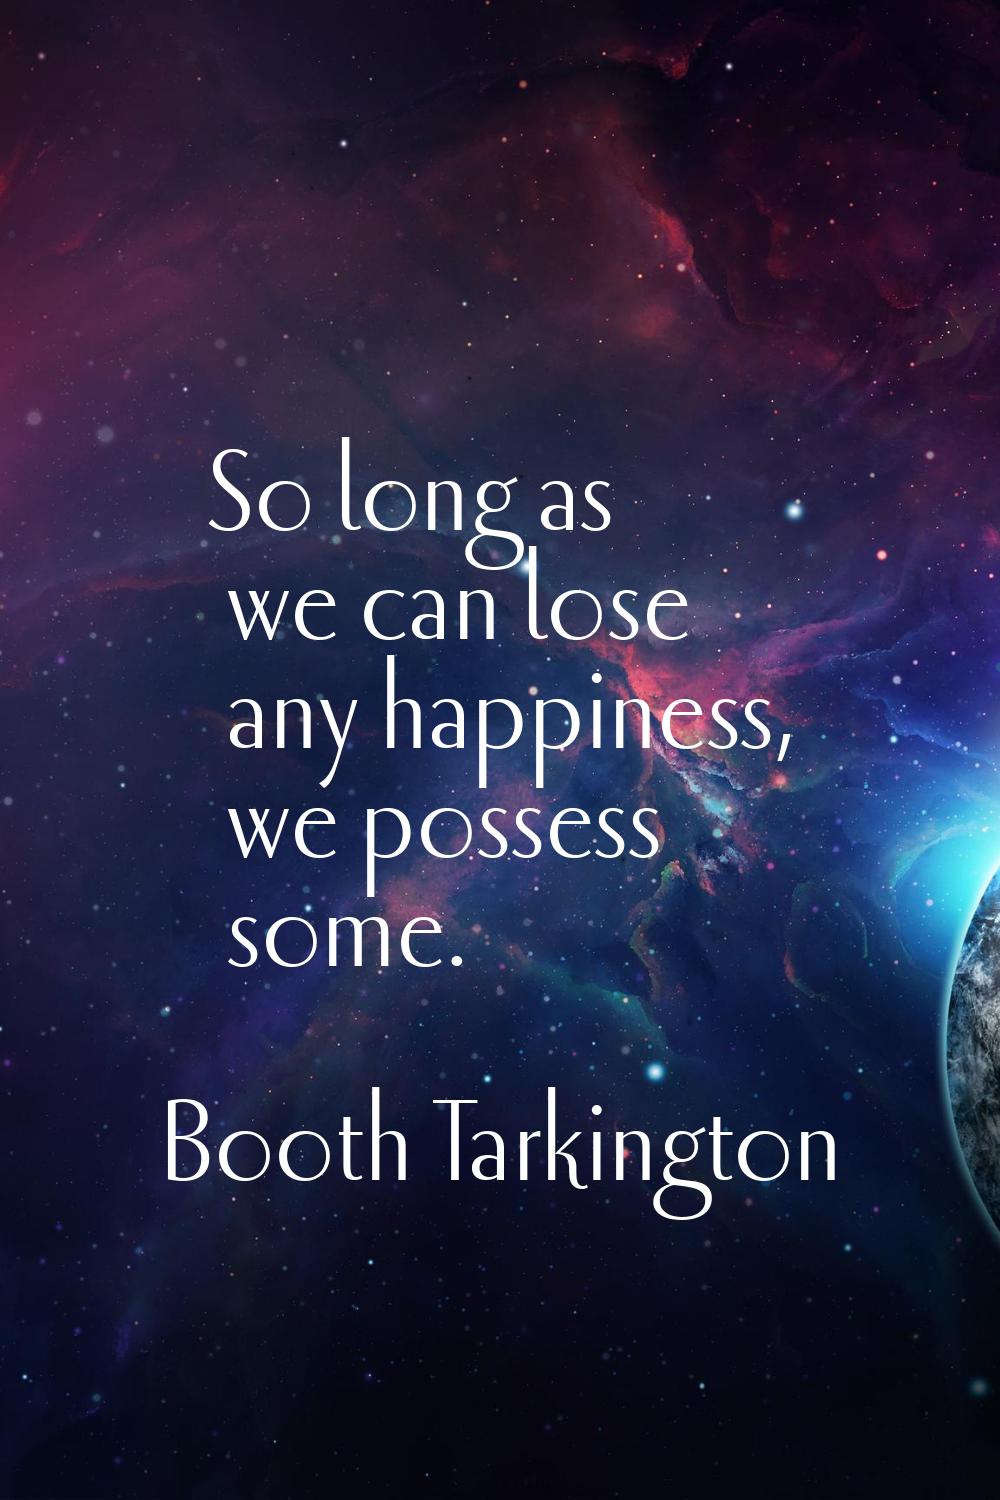 So long as we can lose any happiness, we possess some.